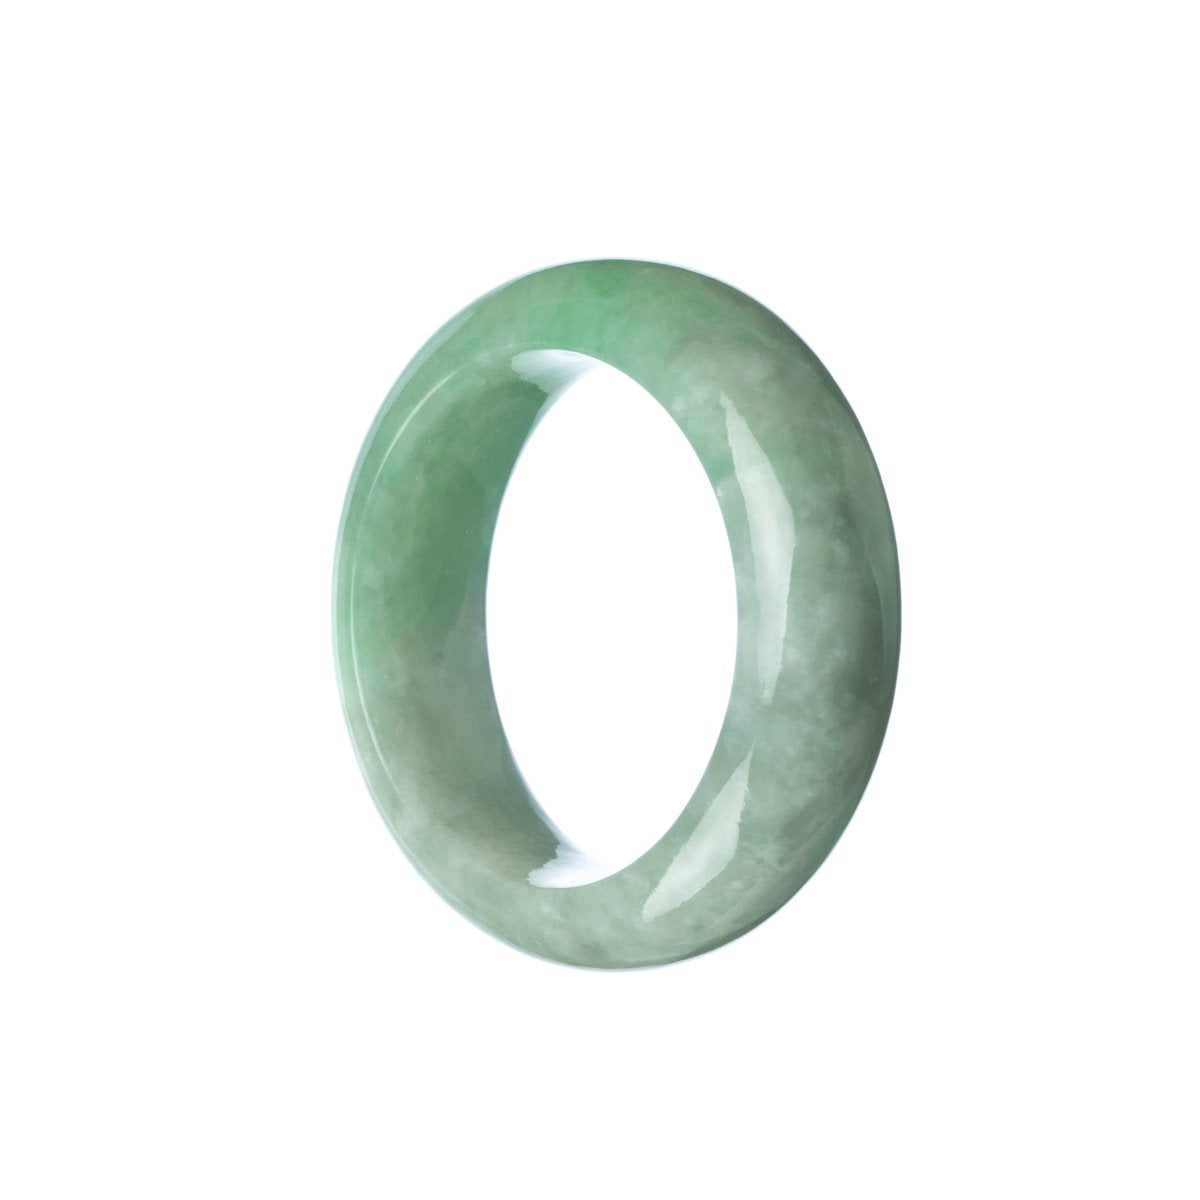 A half-moon-shaped green jade bracelet for children, featuring authentic and natural traditional jade.